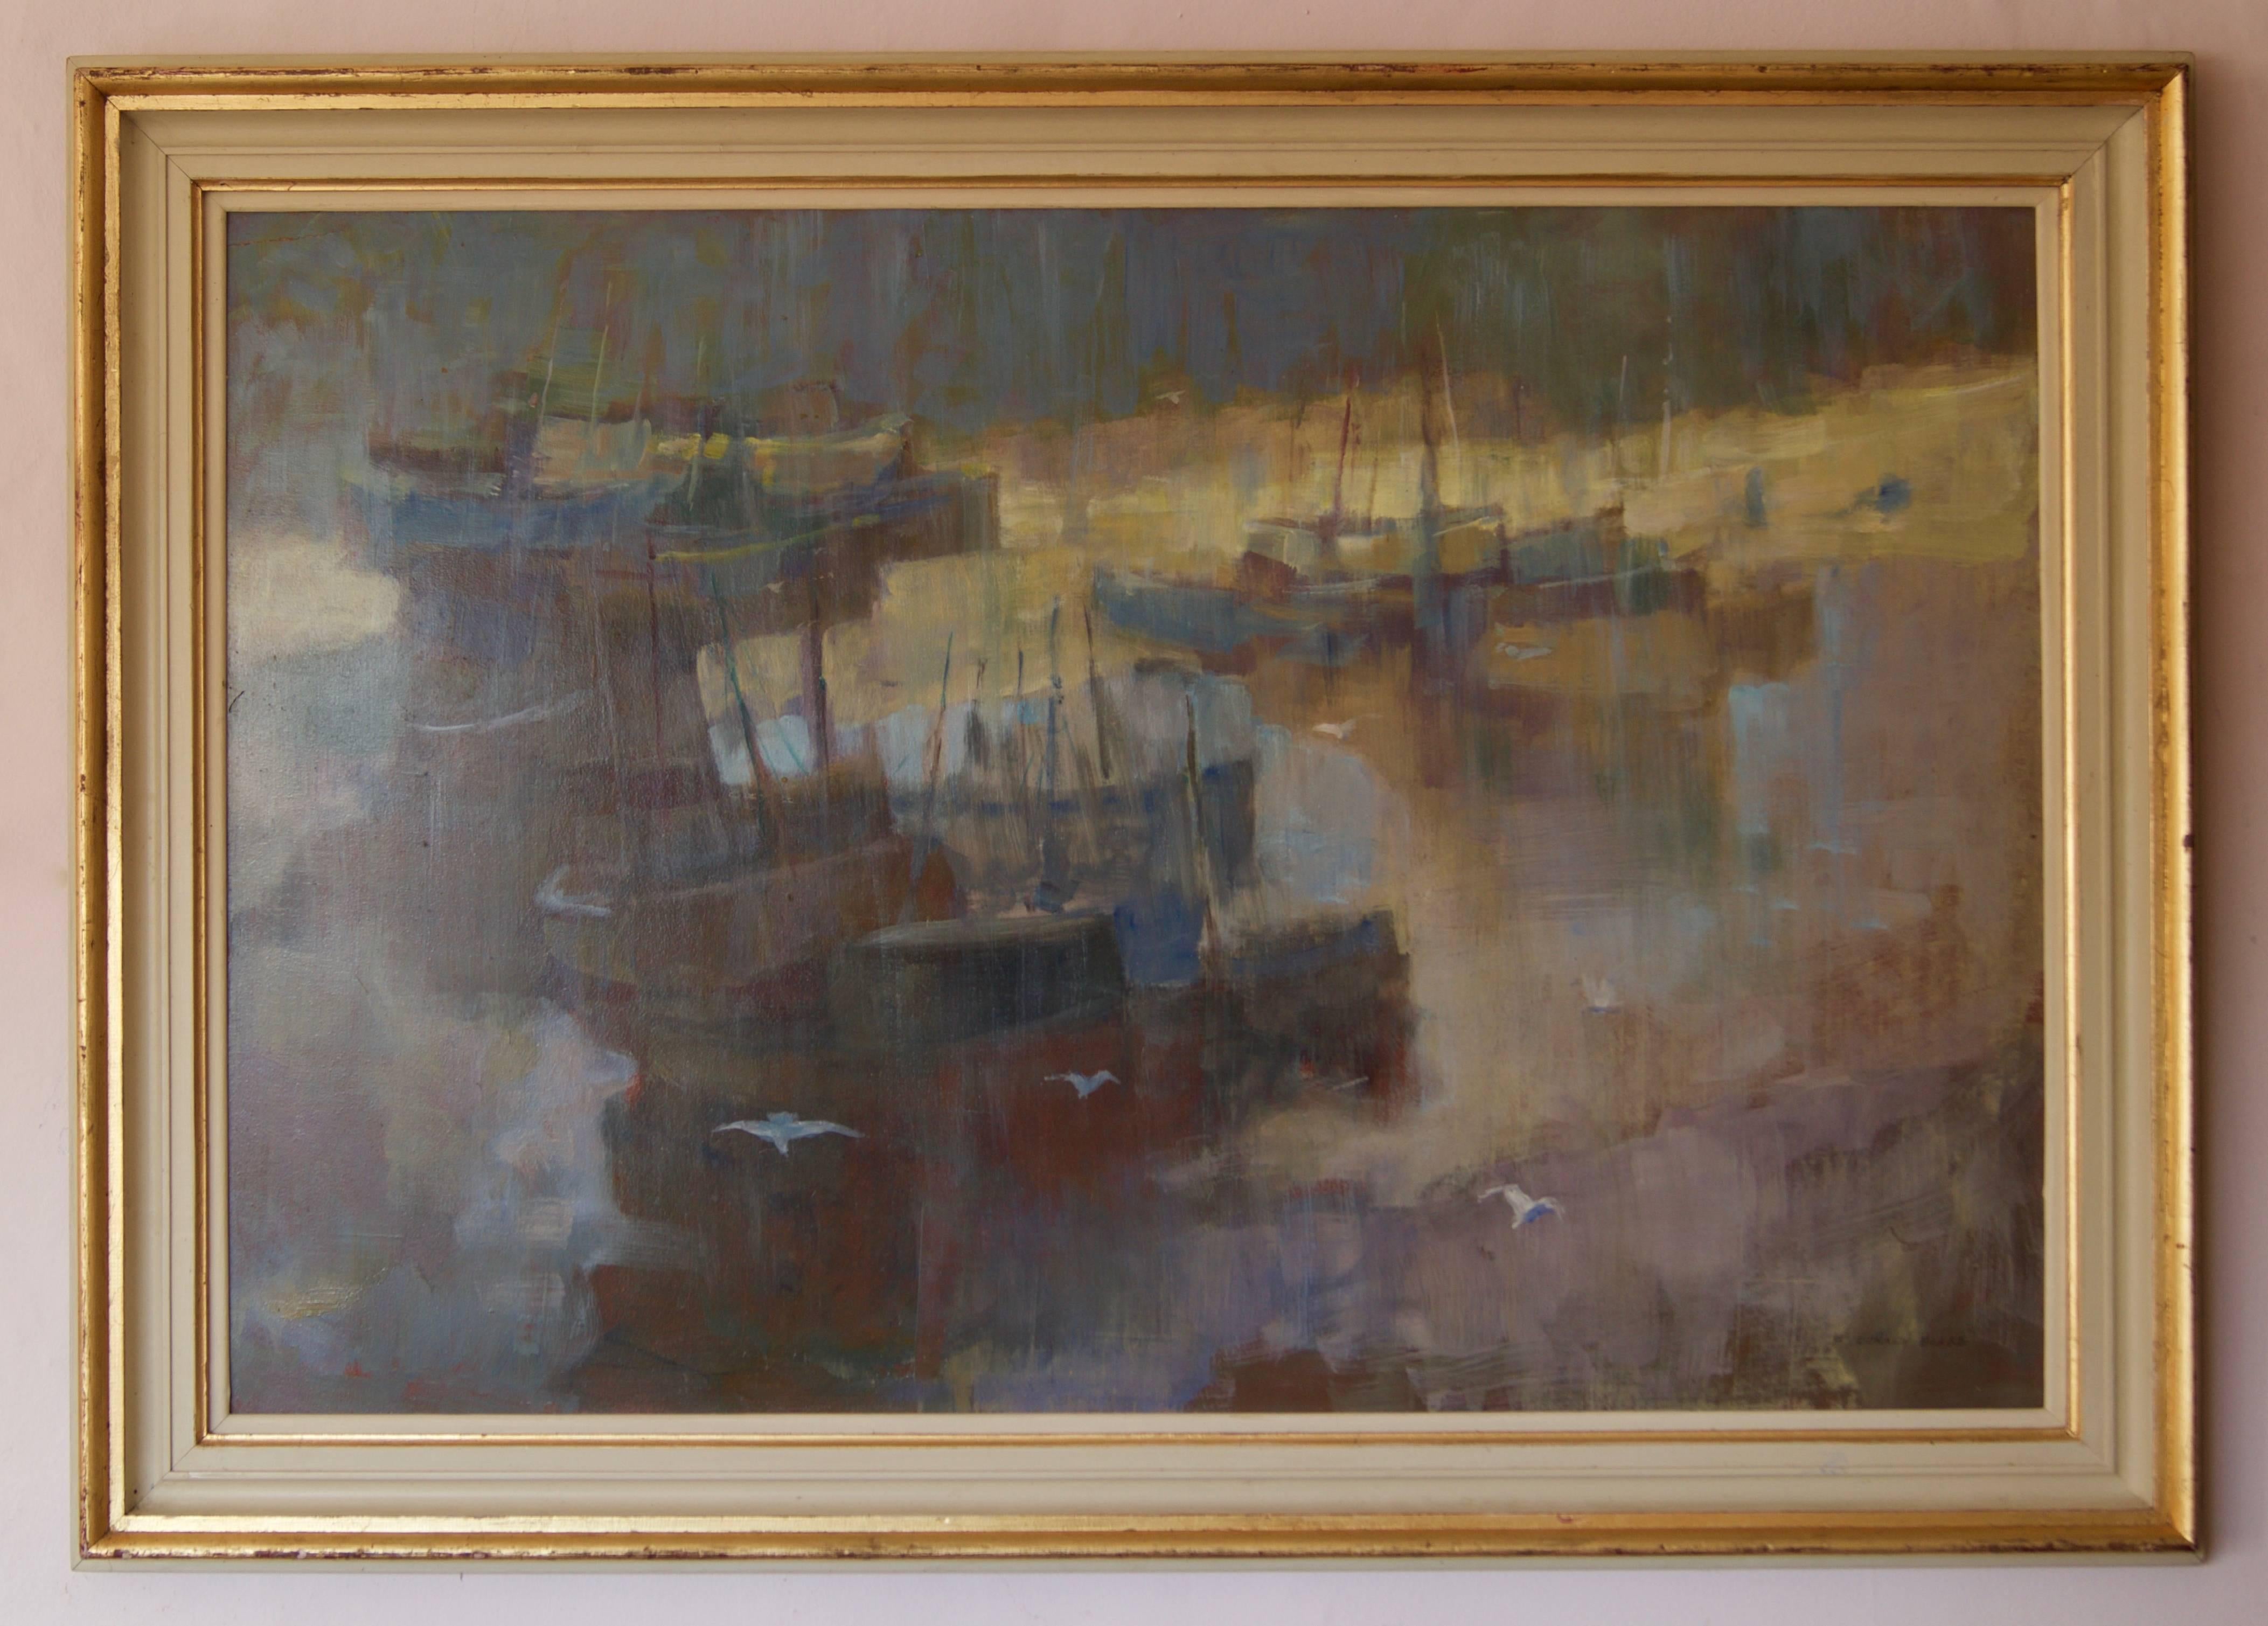 Morning Light Seascape - Mid 20th Century Oil of Boats England by Donald Blake - Painting by Frederick Donald Blake